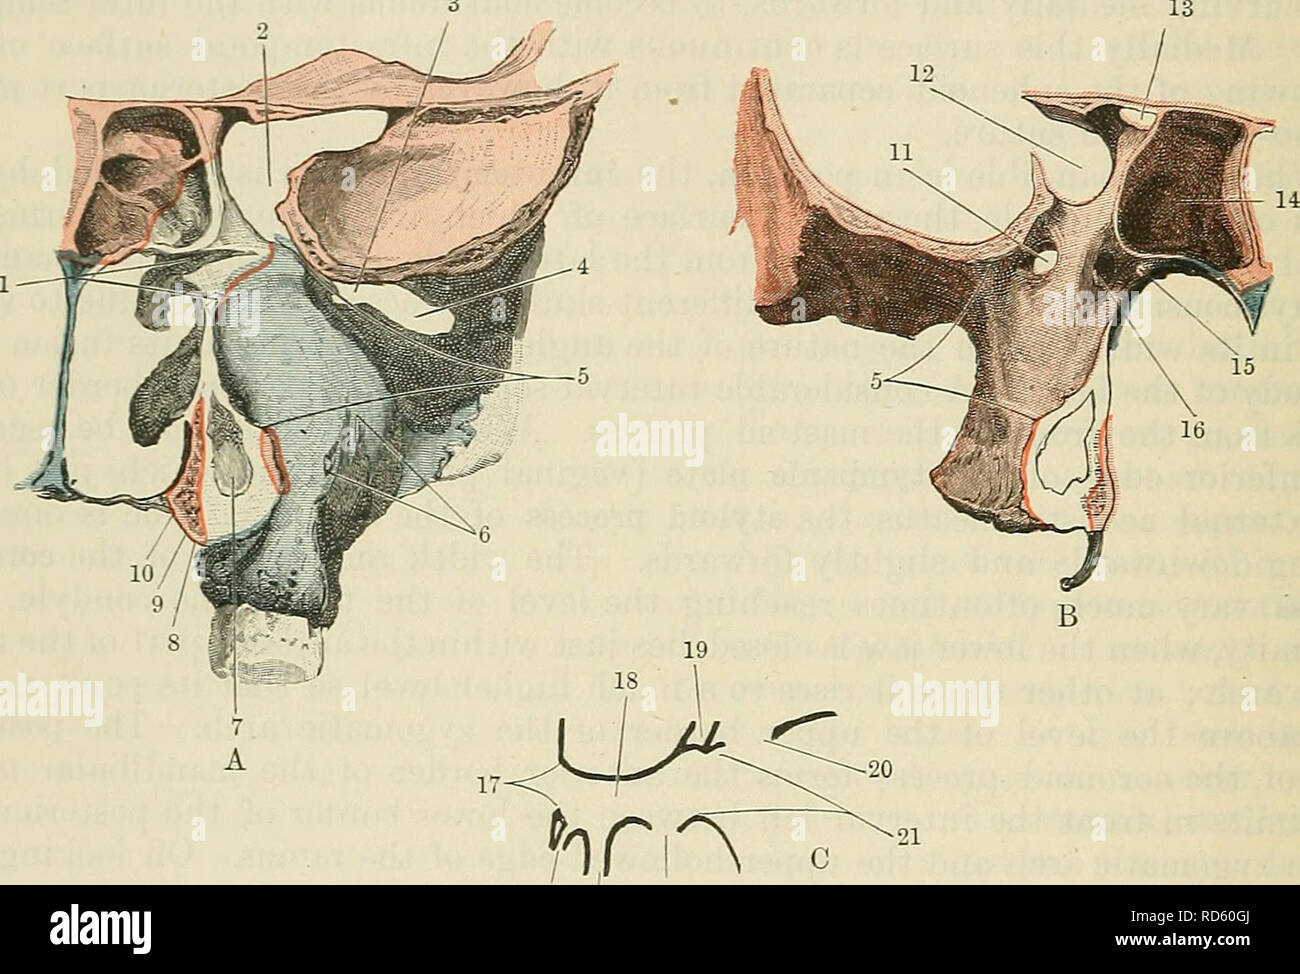 . Cunningham's Text-book of anatomy. Anatomy. 170 OSTEOLOGY. temporal fossa, whilst inferiorly it is continuous with the infra-maxillary region. Medially, on the floor of the fossa there is an r-shaped fissure, the horizontal limb of which corresponds to the inferior orbital fissure, forming a channel of communication between the fossa and the orbit, through which passes the zygomatic branch of the maxillary division of the trigeminal nerve; whilst the vertical cleft is the pterygo-maxillary fissure, which leads into a small fossa placed between the front of the root of the pterygoid process o Stock Photo